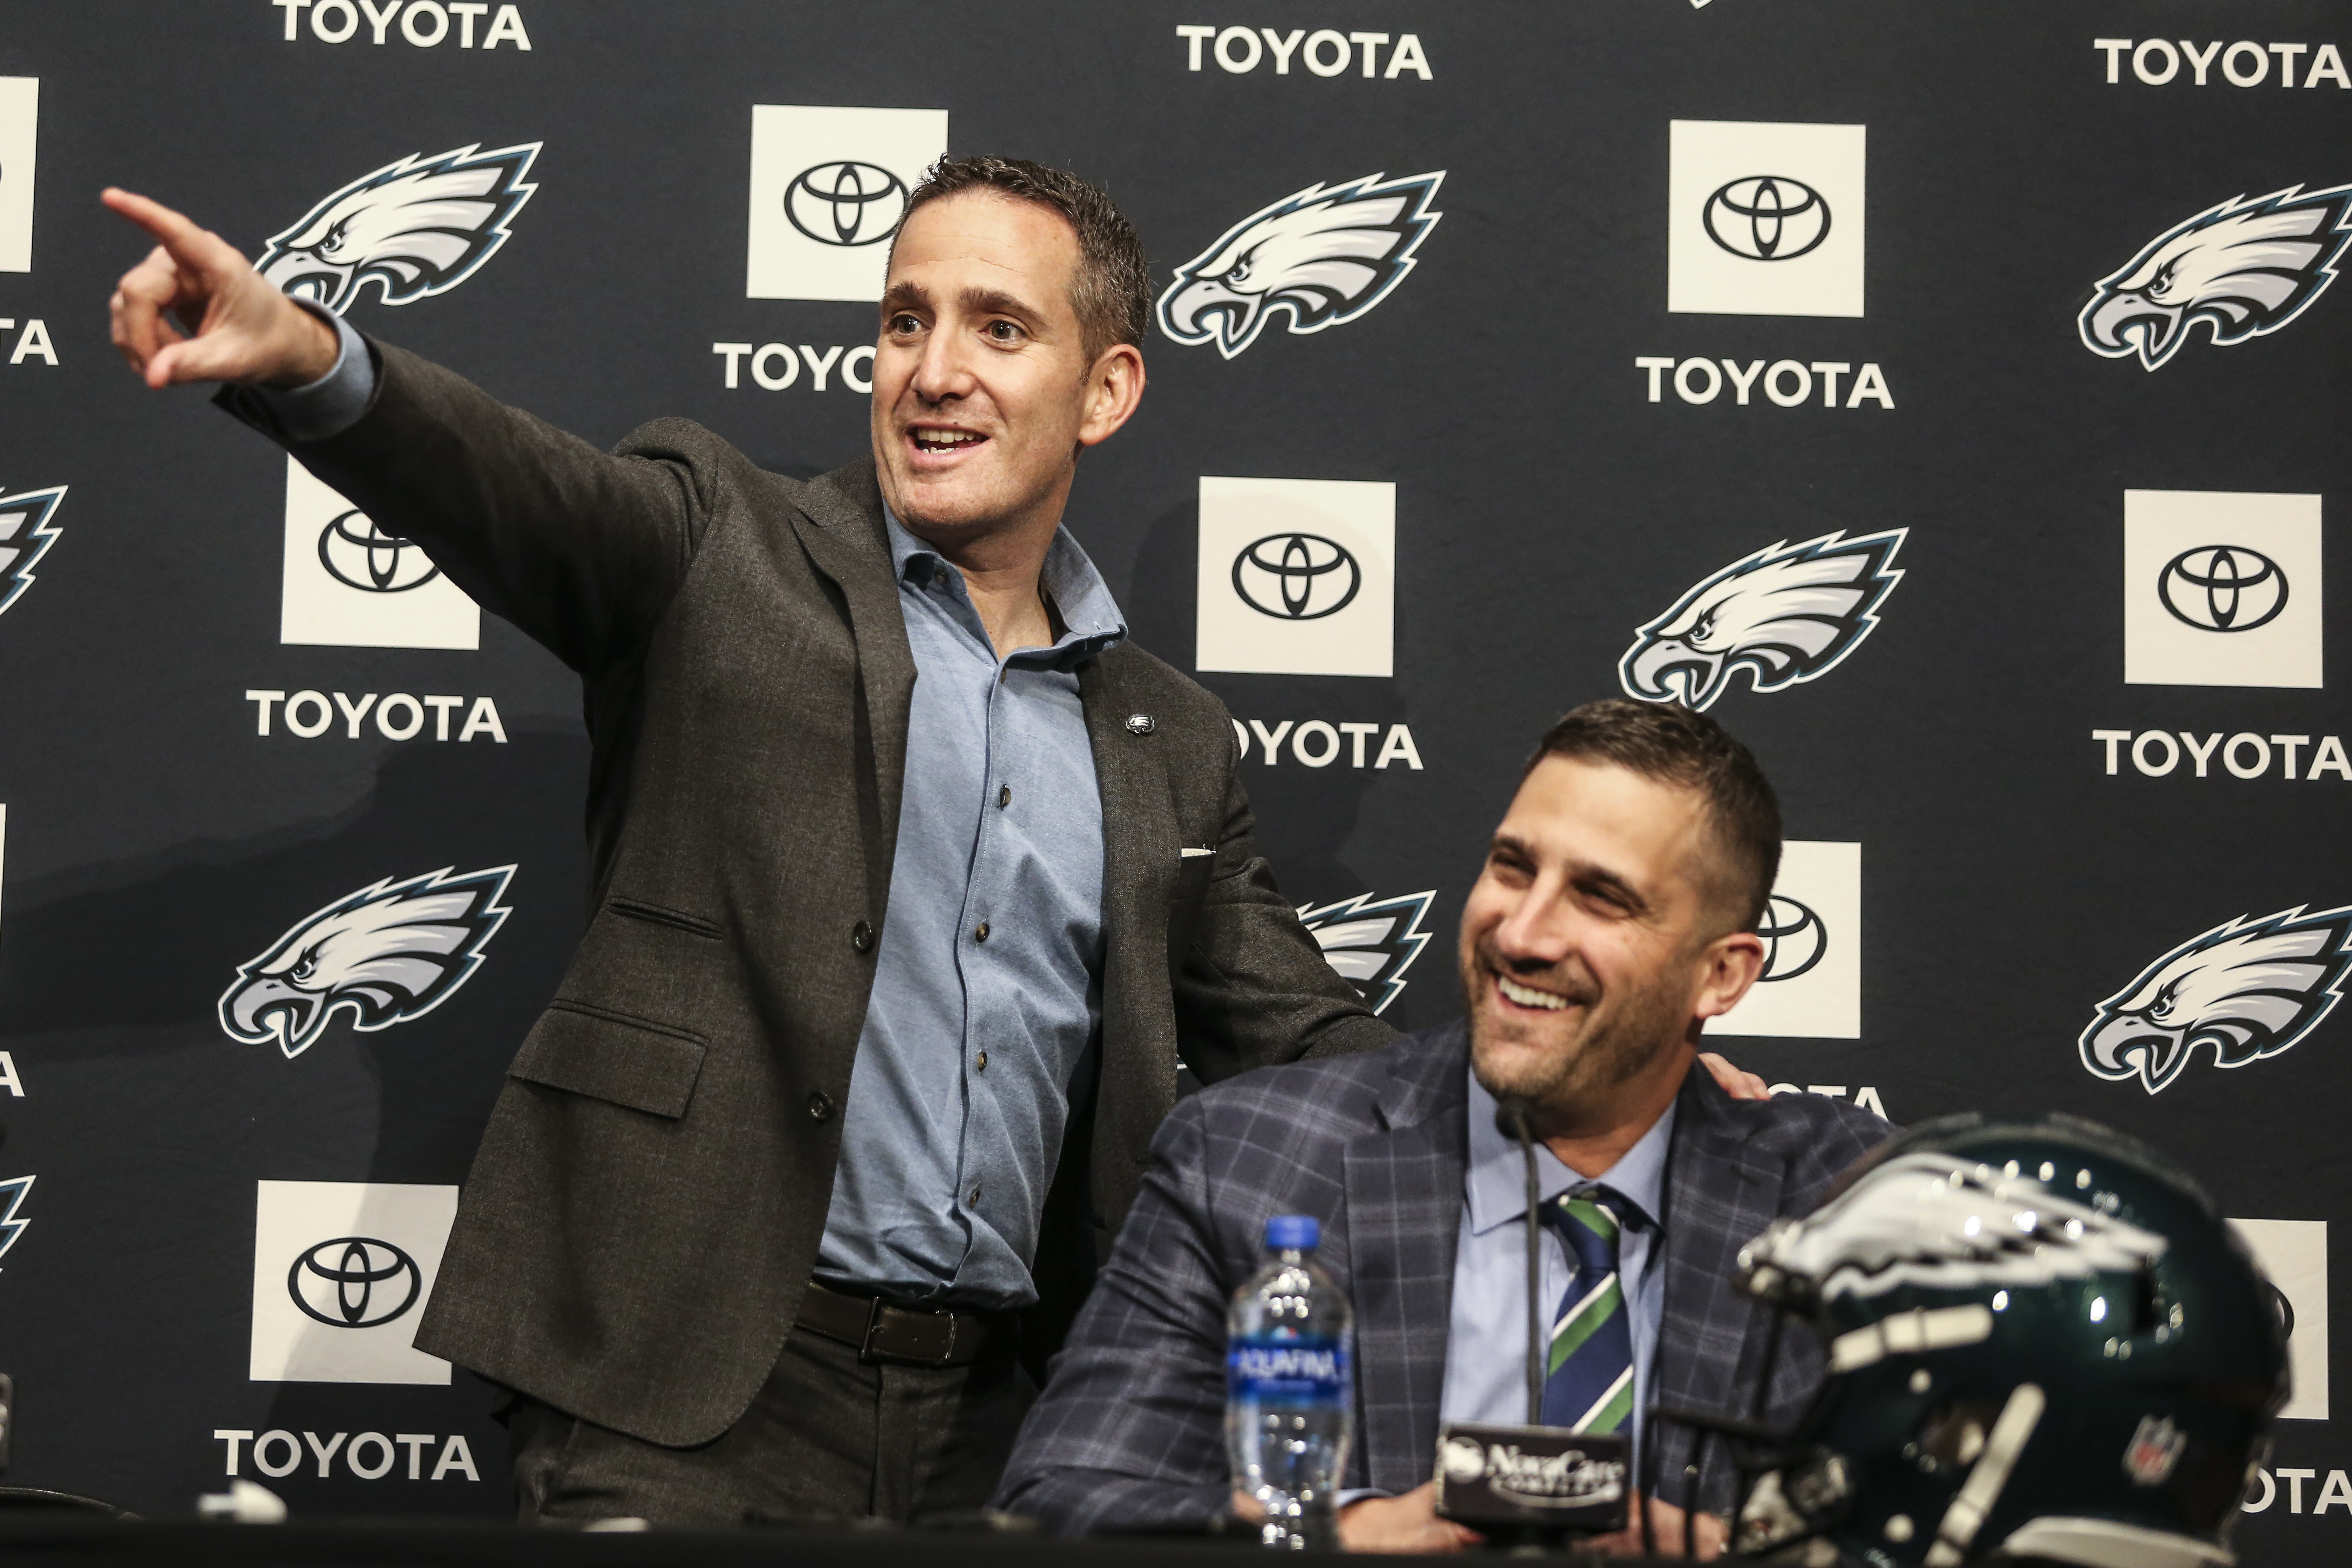 Eagles 2022 draft: Analysis of every pick, trade and more